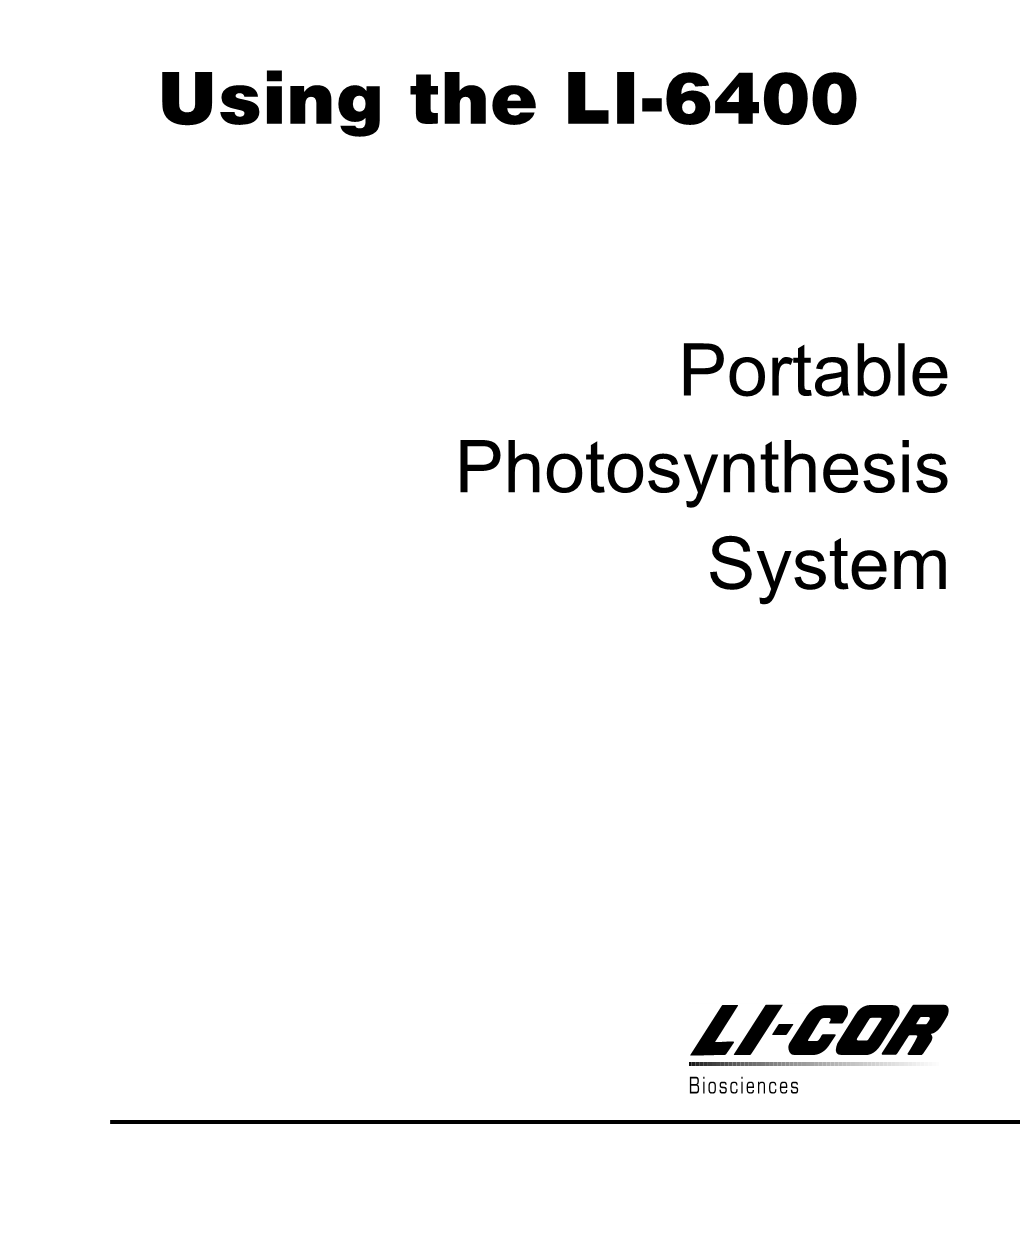 Using the LI-6400 Portable Photosynthesis System